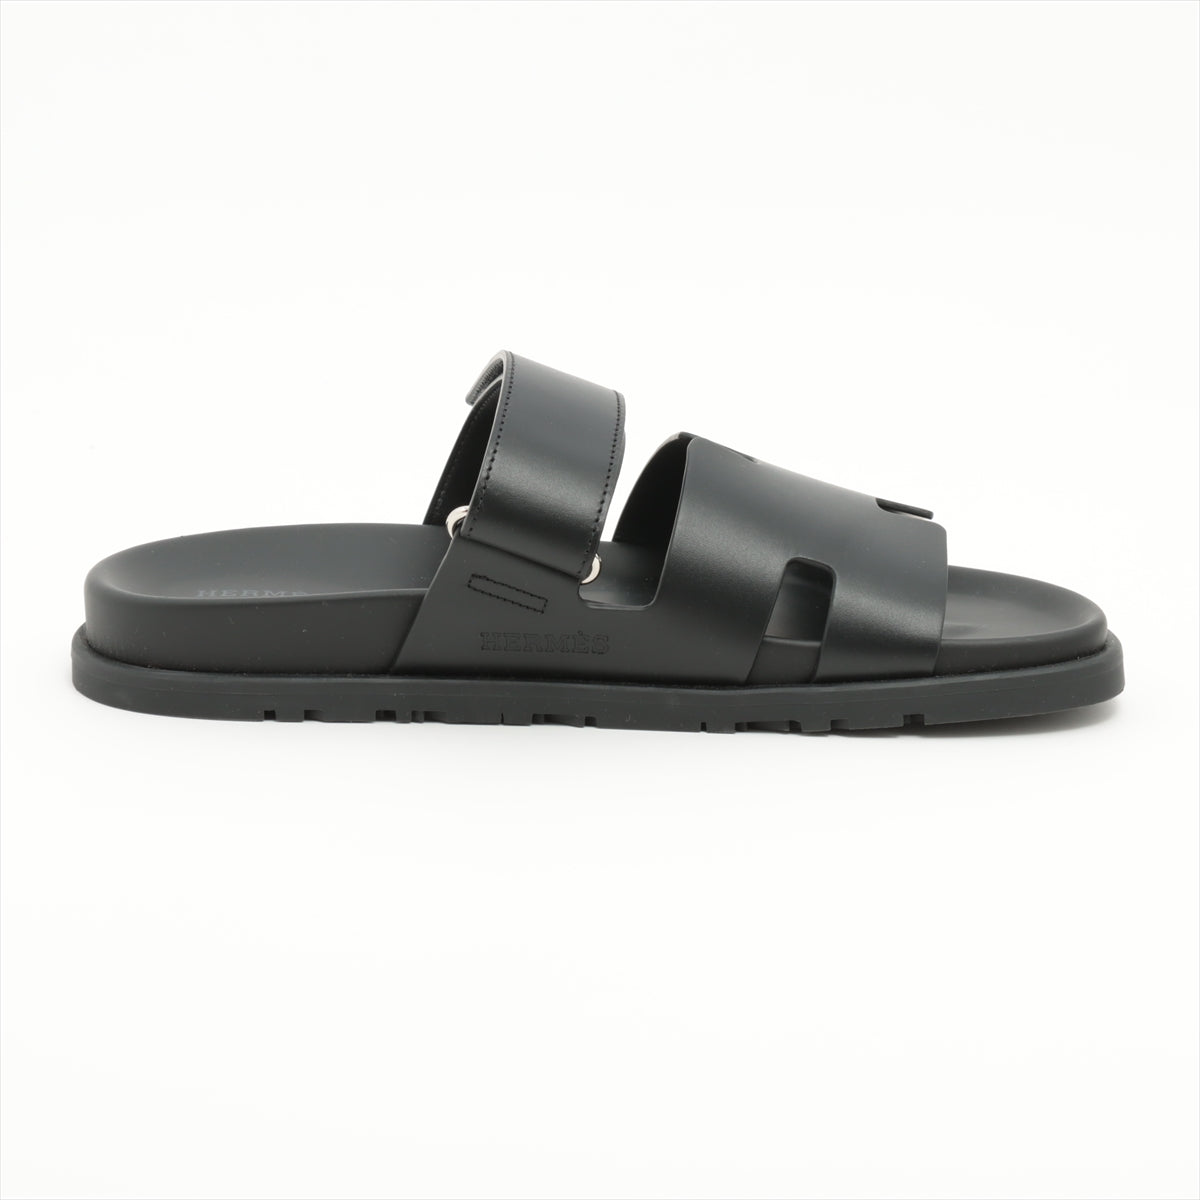 Hermès Cypre Leather Sandals 41 Men's Black box There is a bag